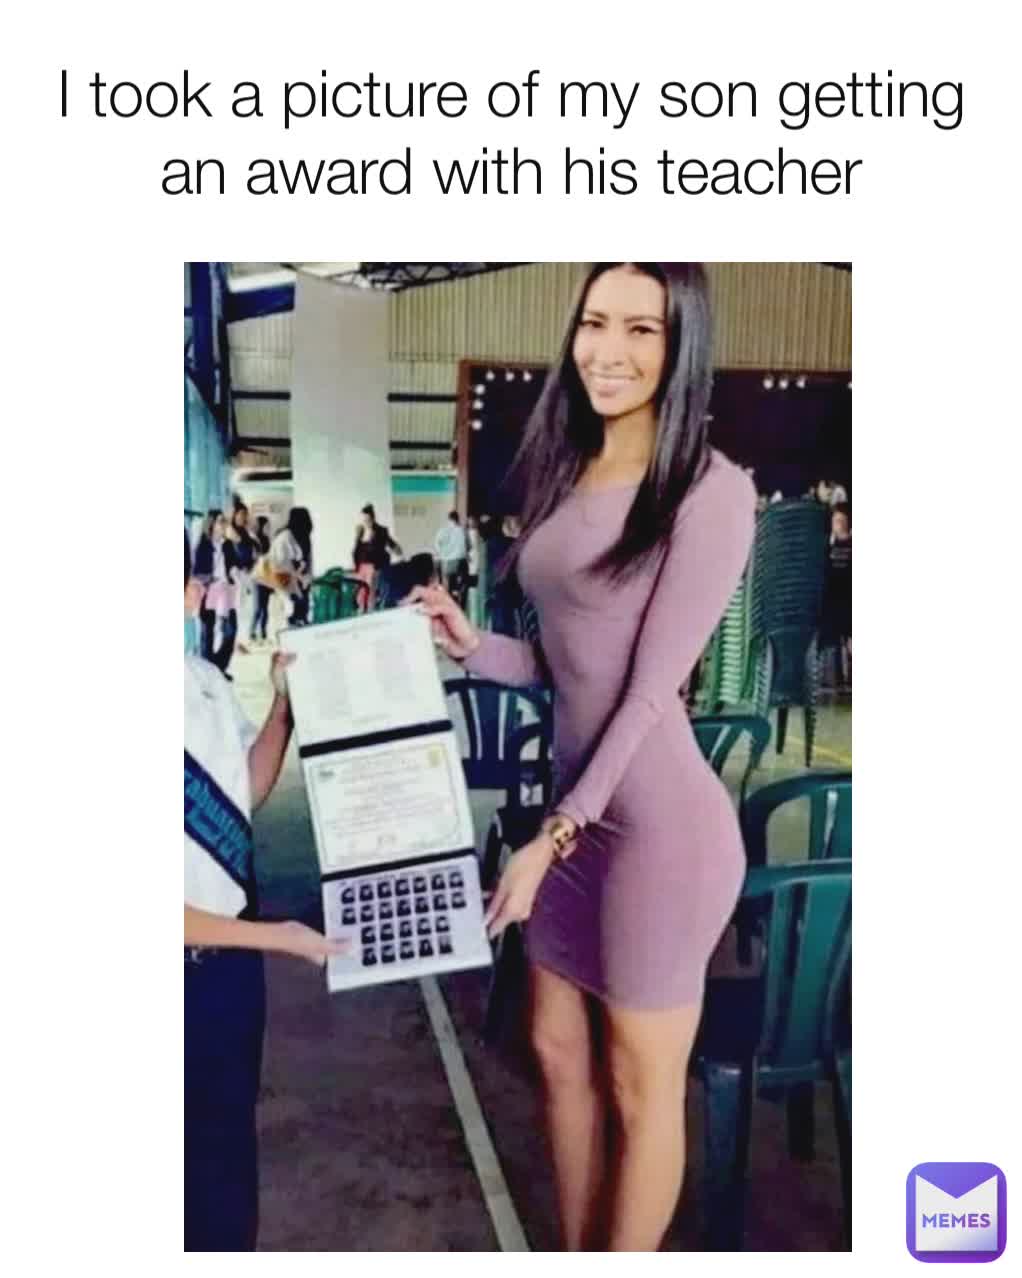 I took a picture of my son getting an award with his teacher